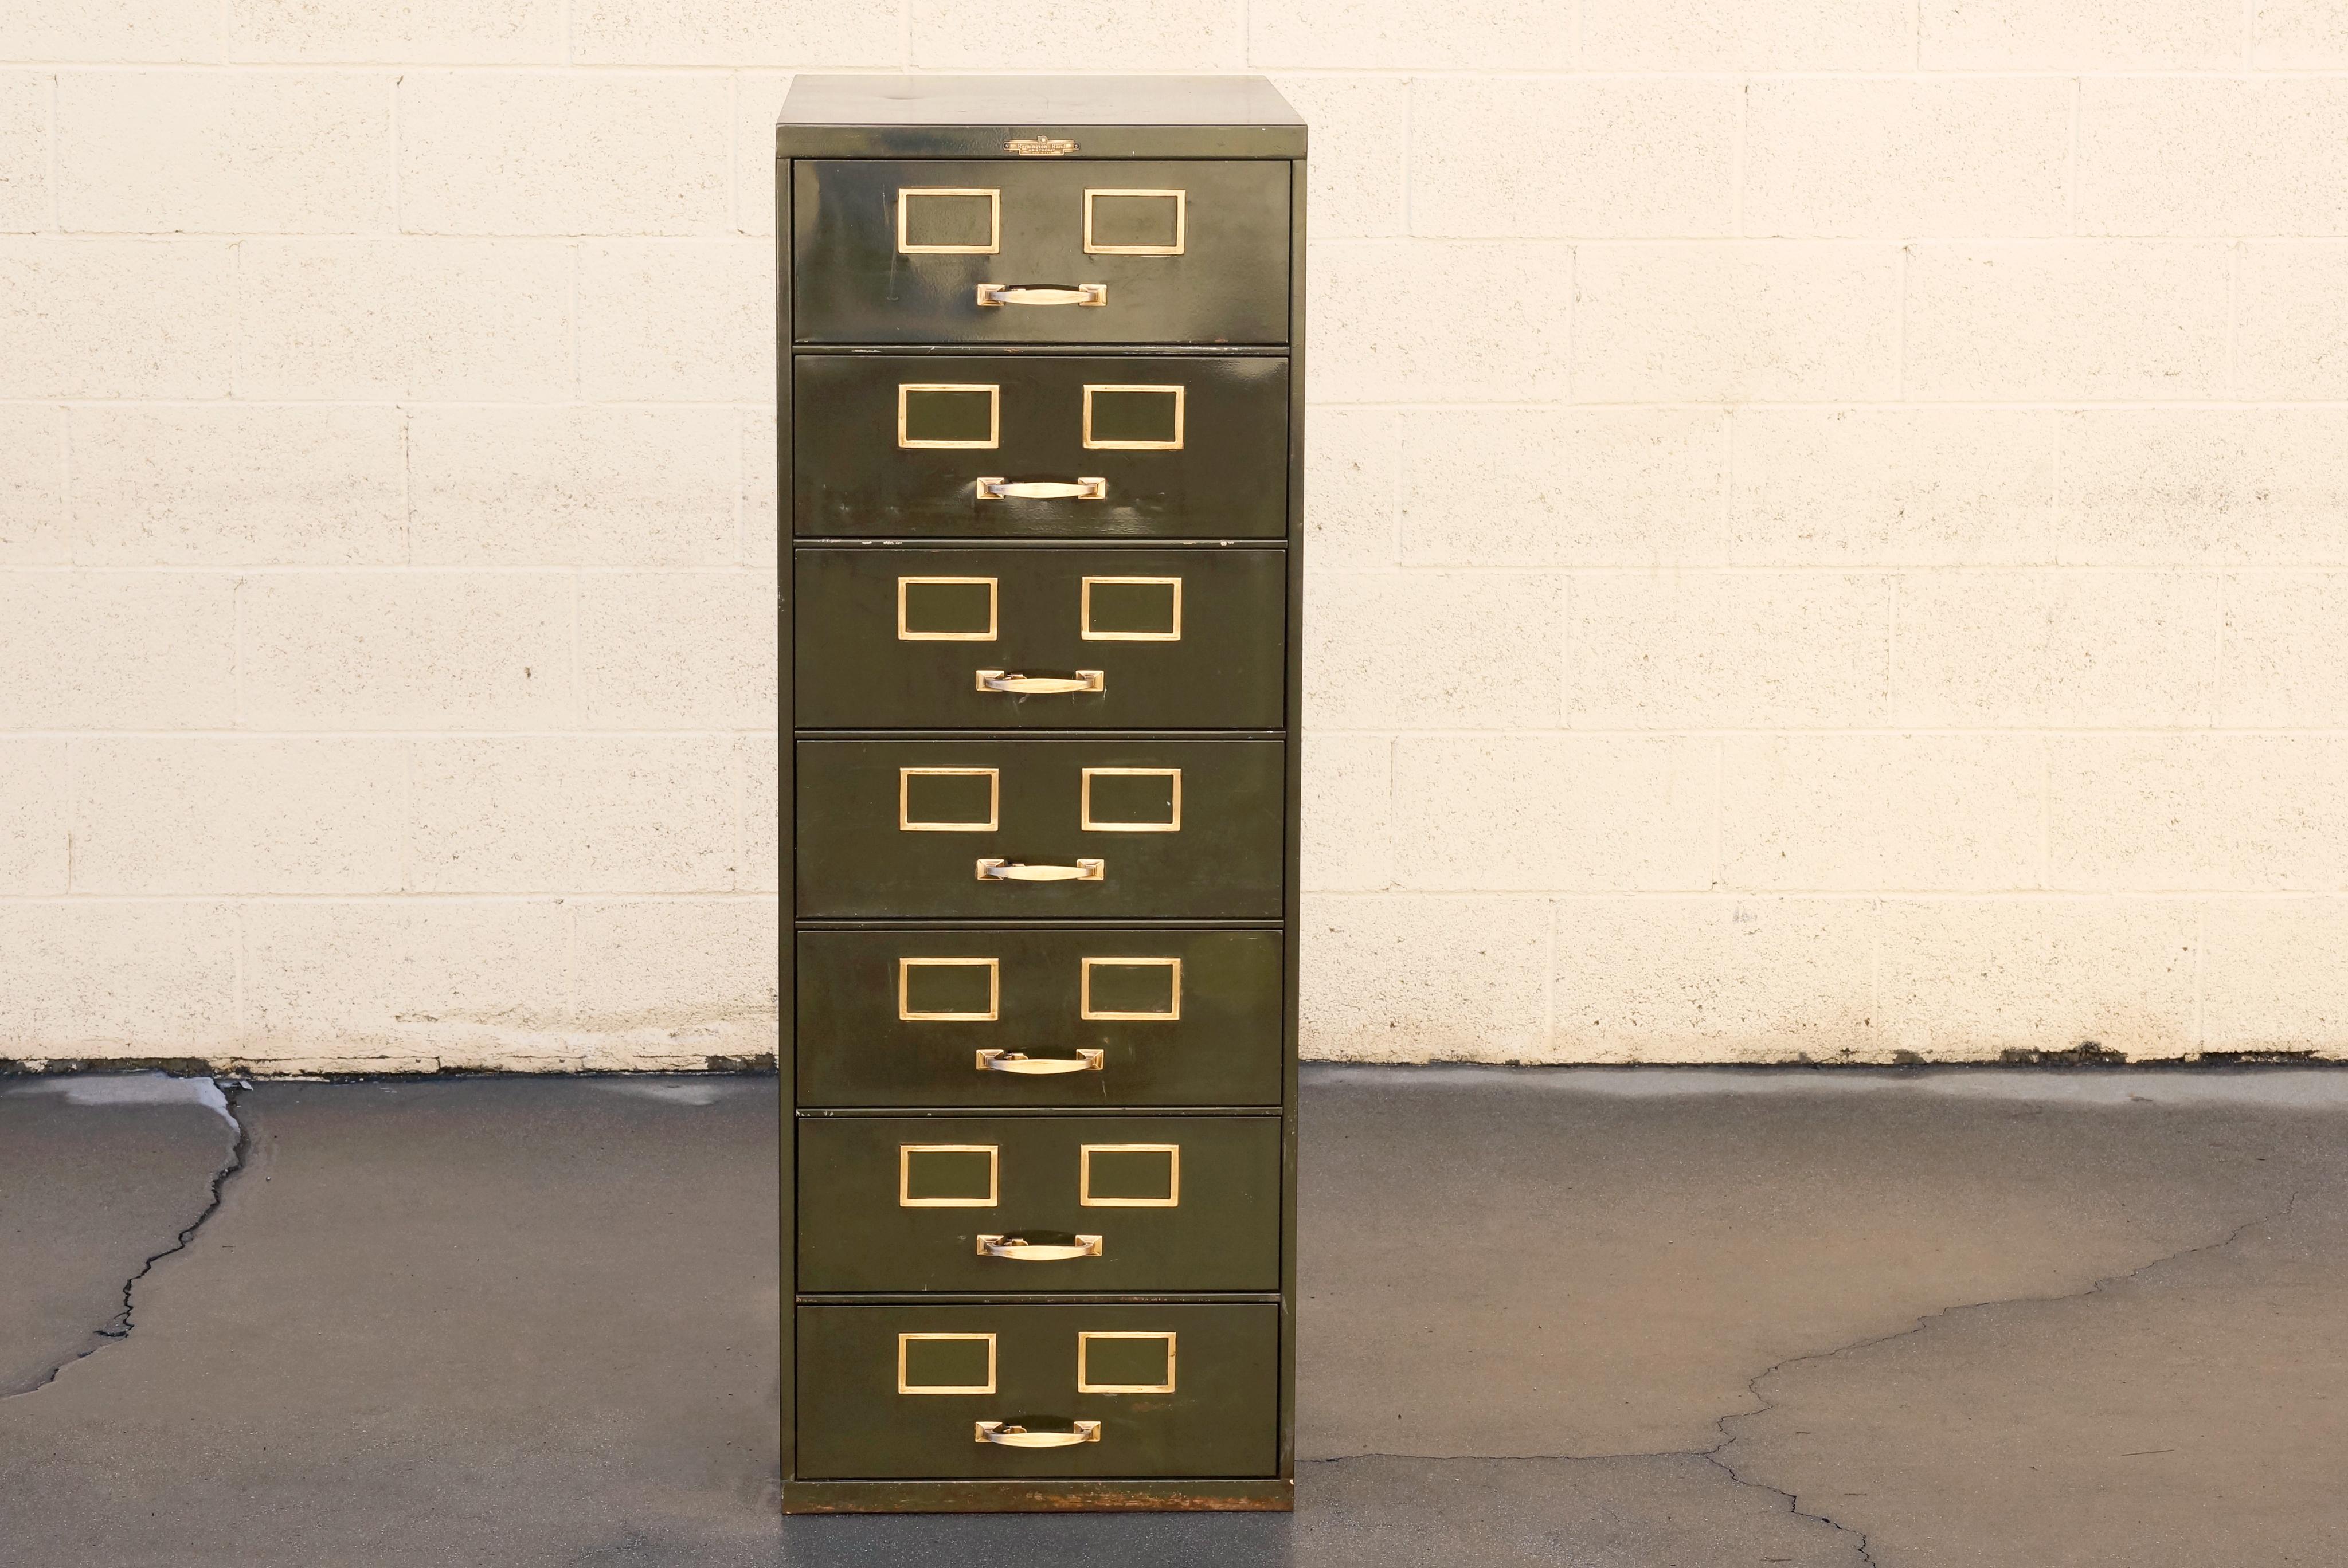 Classic American multi drawer card filing cabinet by Remington Rand. Industrial era, composed of steel. Original army green paint with characteristic patina. Original polished brass hardware and label. Features seven drawers, circa